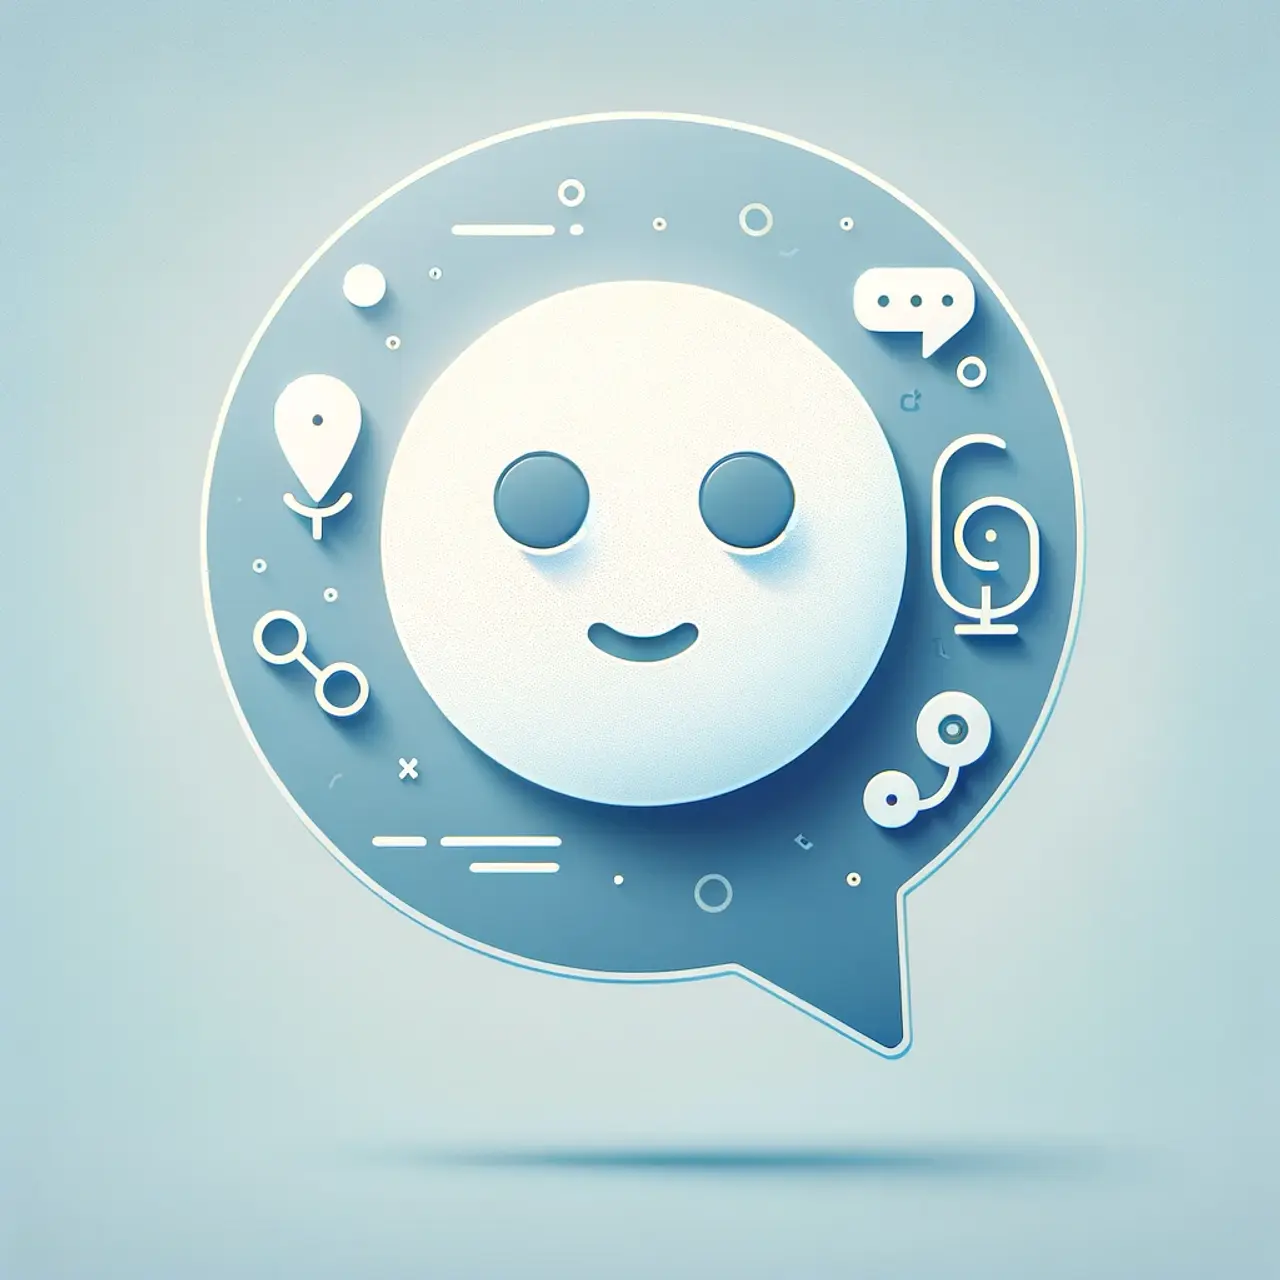 DALL·E 2023-12-06 13.26.39 - A simplistic and abstract representation of conversational AI. The image features a minimalist design with a large, friendly-looking speech bubble in .png